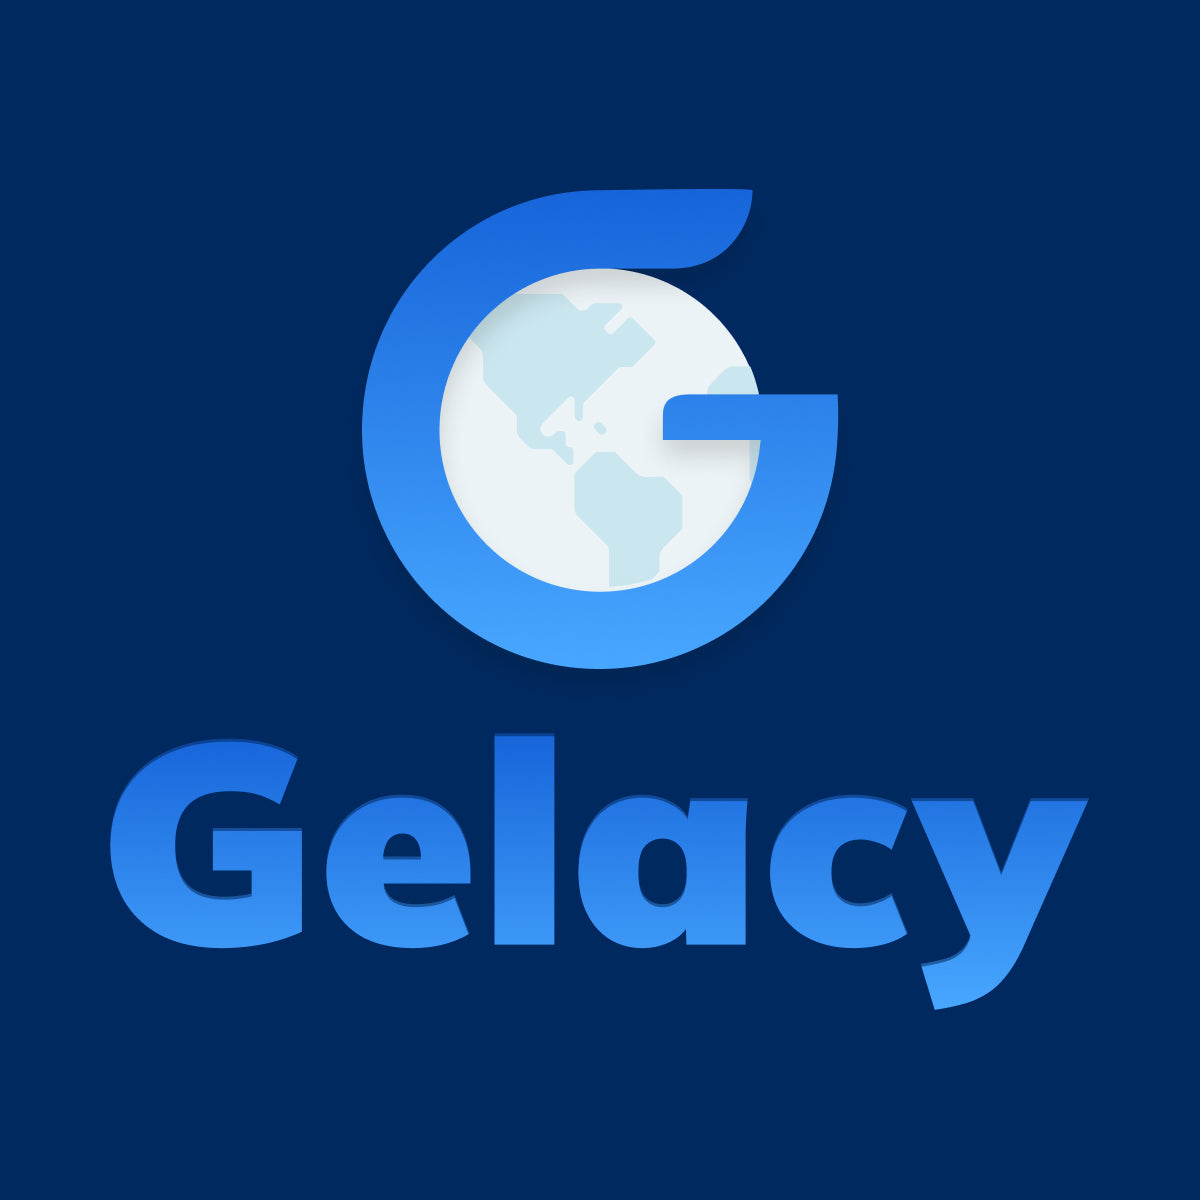 Gelacy ‑ Geolocation Redirects